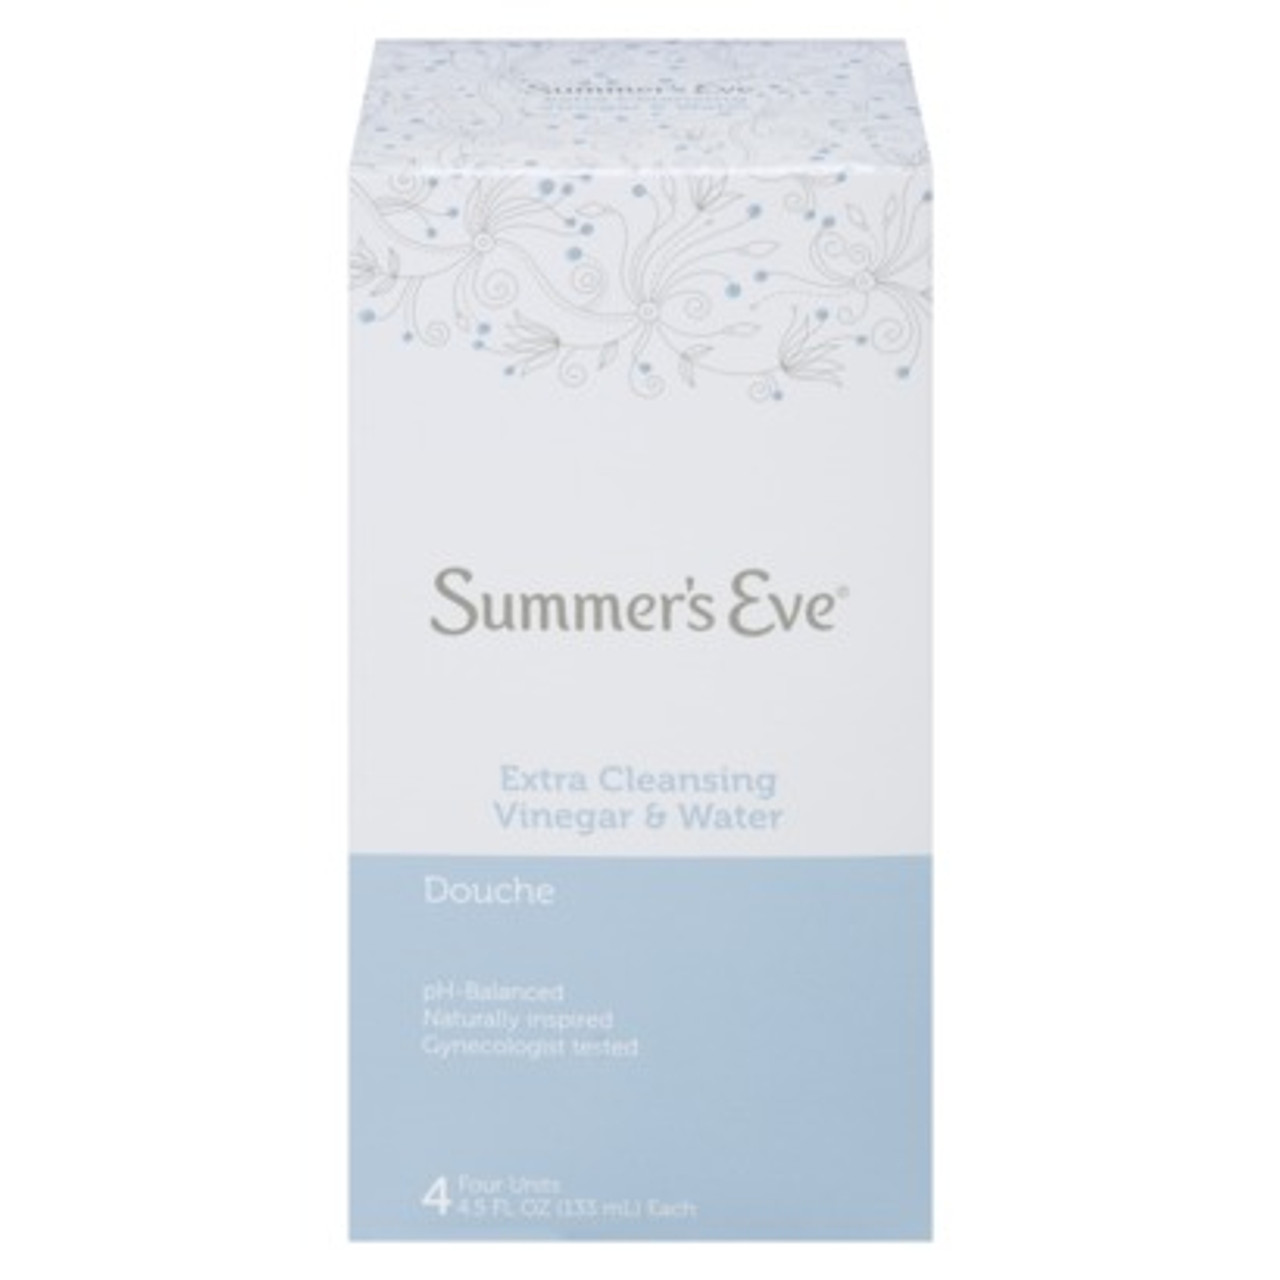 Summer's Eve Douche, Extra Cleansing Vinegar & Water